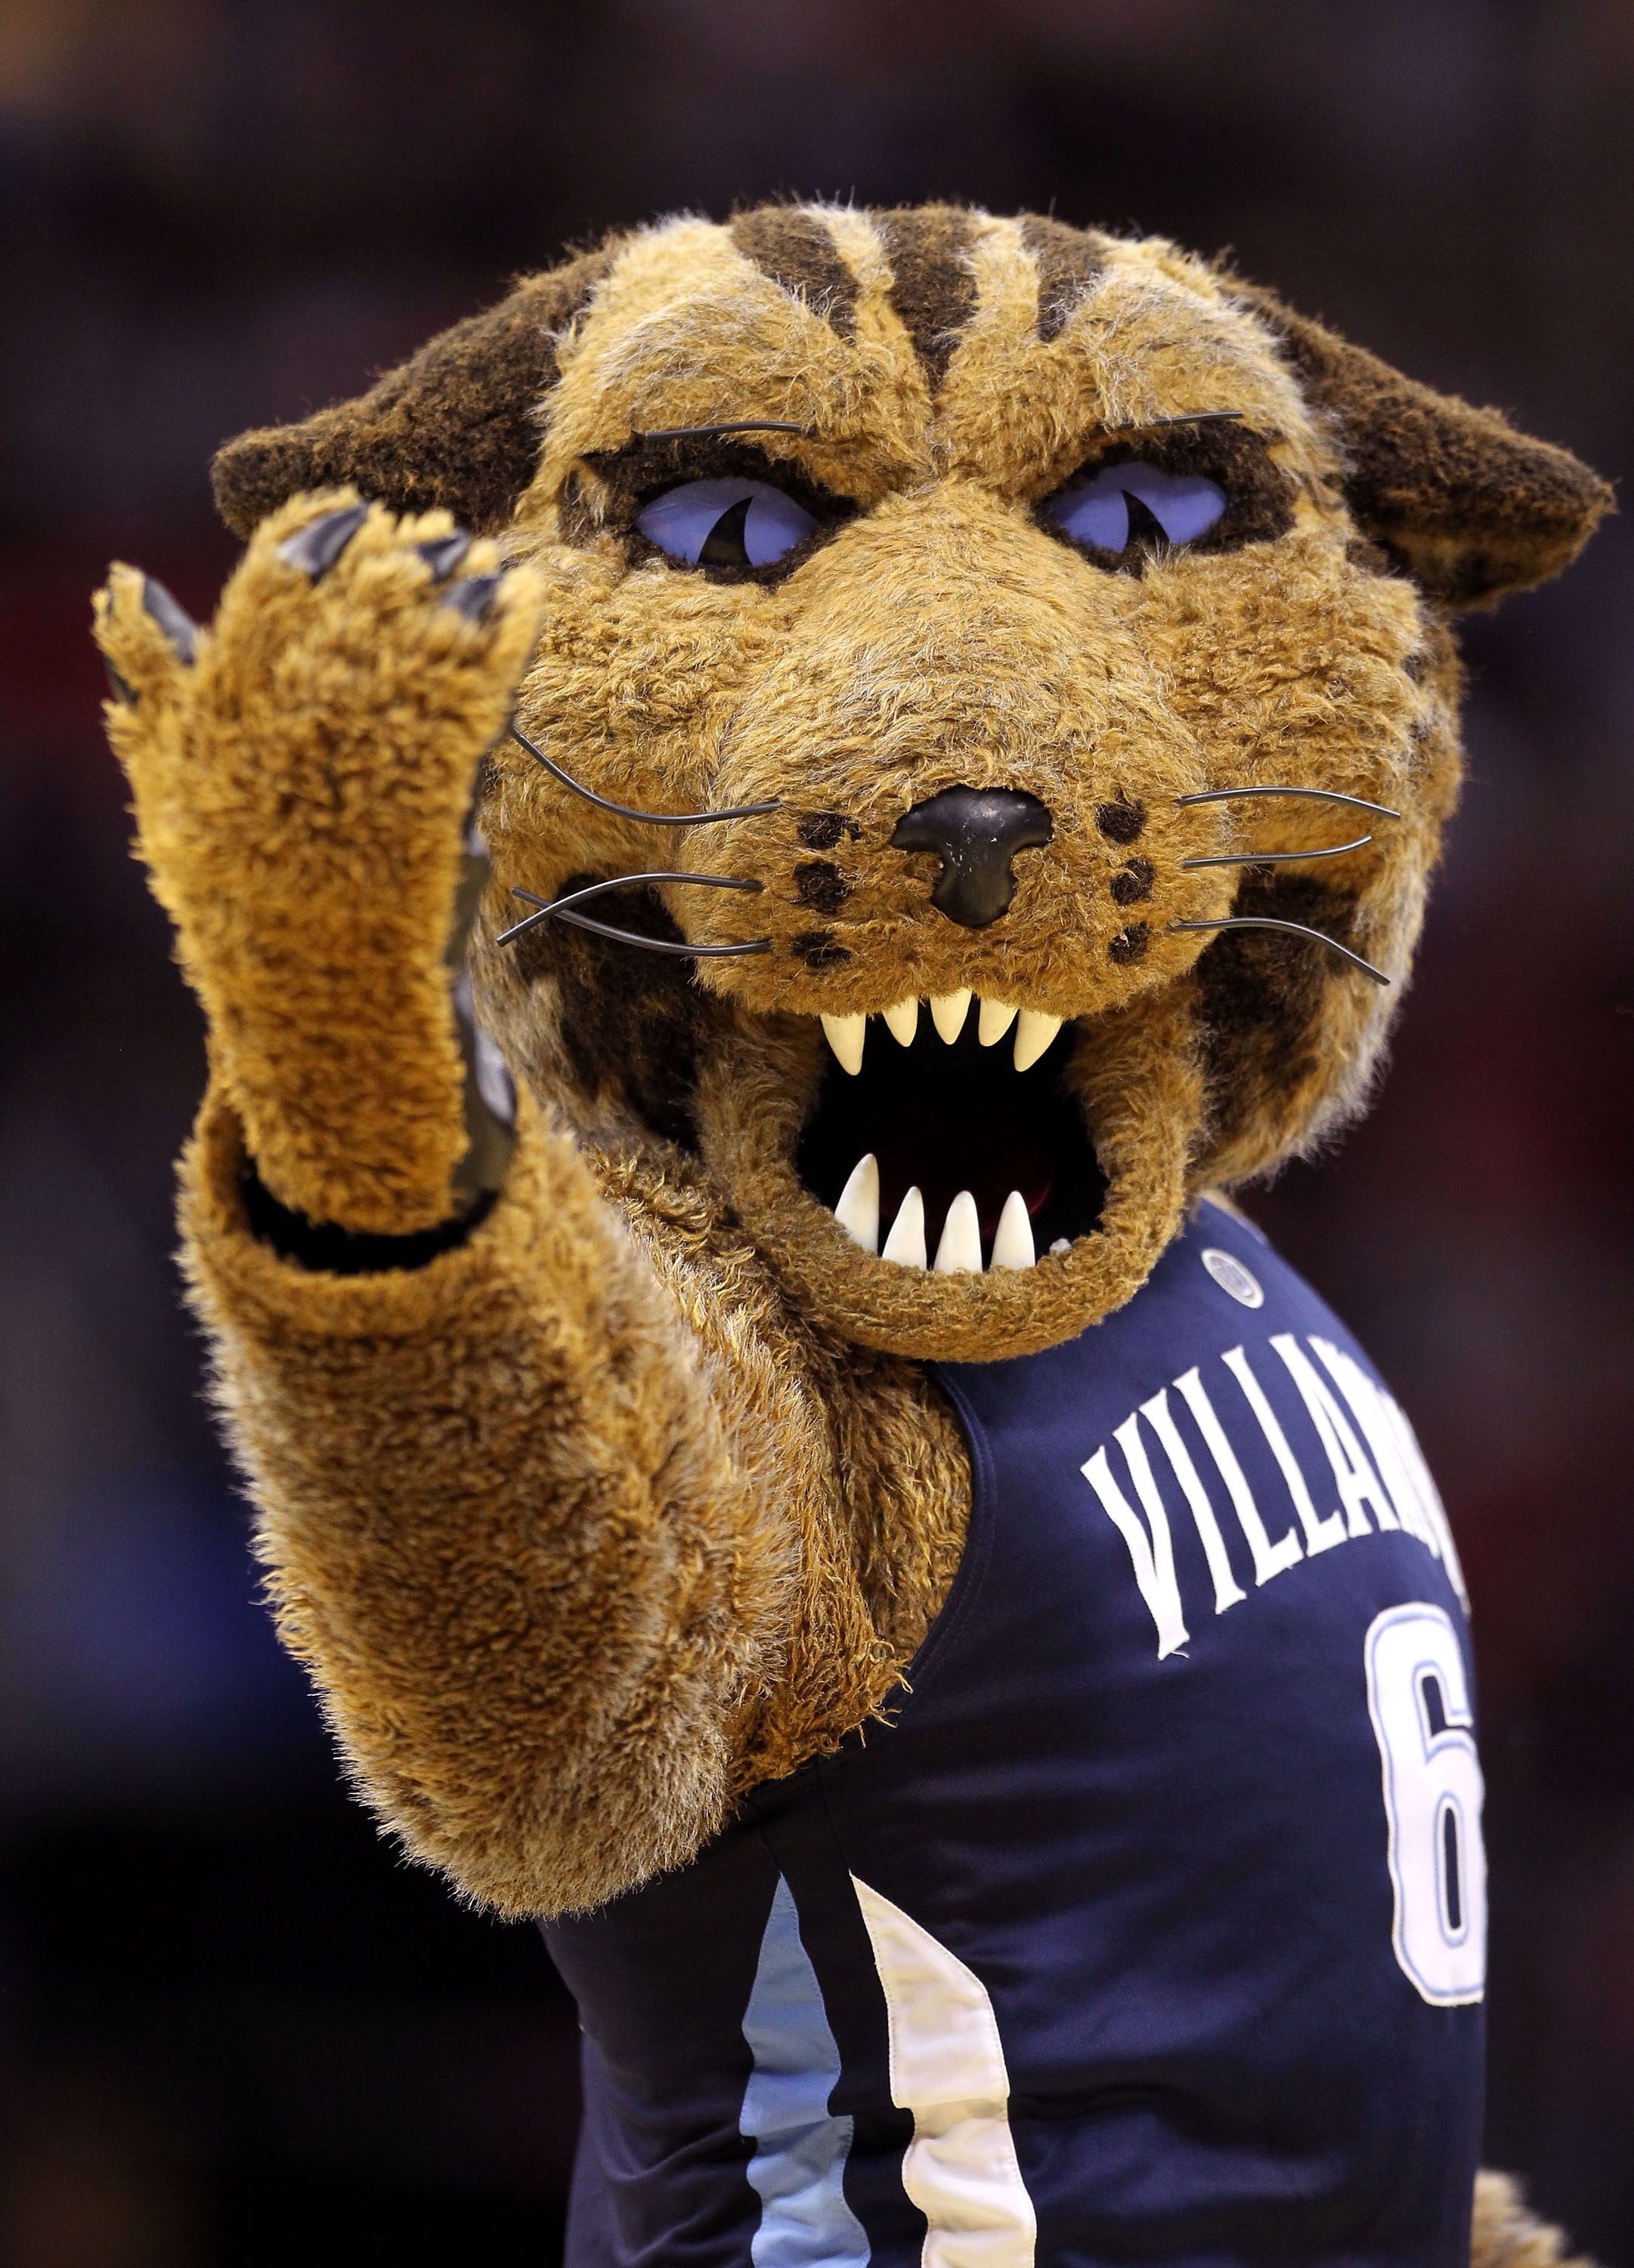 CLEVELAND, OH - MARCH 18: The Villanova Wildcats mascot walks on the court during the game against the George Mason Patriots during the second round of the 2011 NCAA men's basketball tournament at Quicken Loans Arena on March 18, 2011 in Cleveland, Ohio.